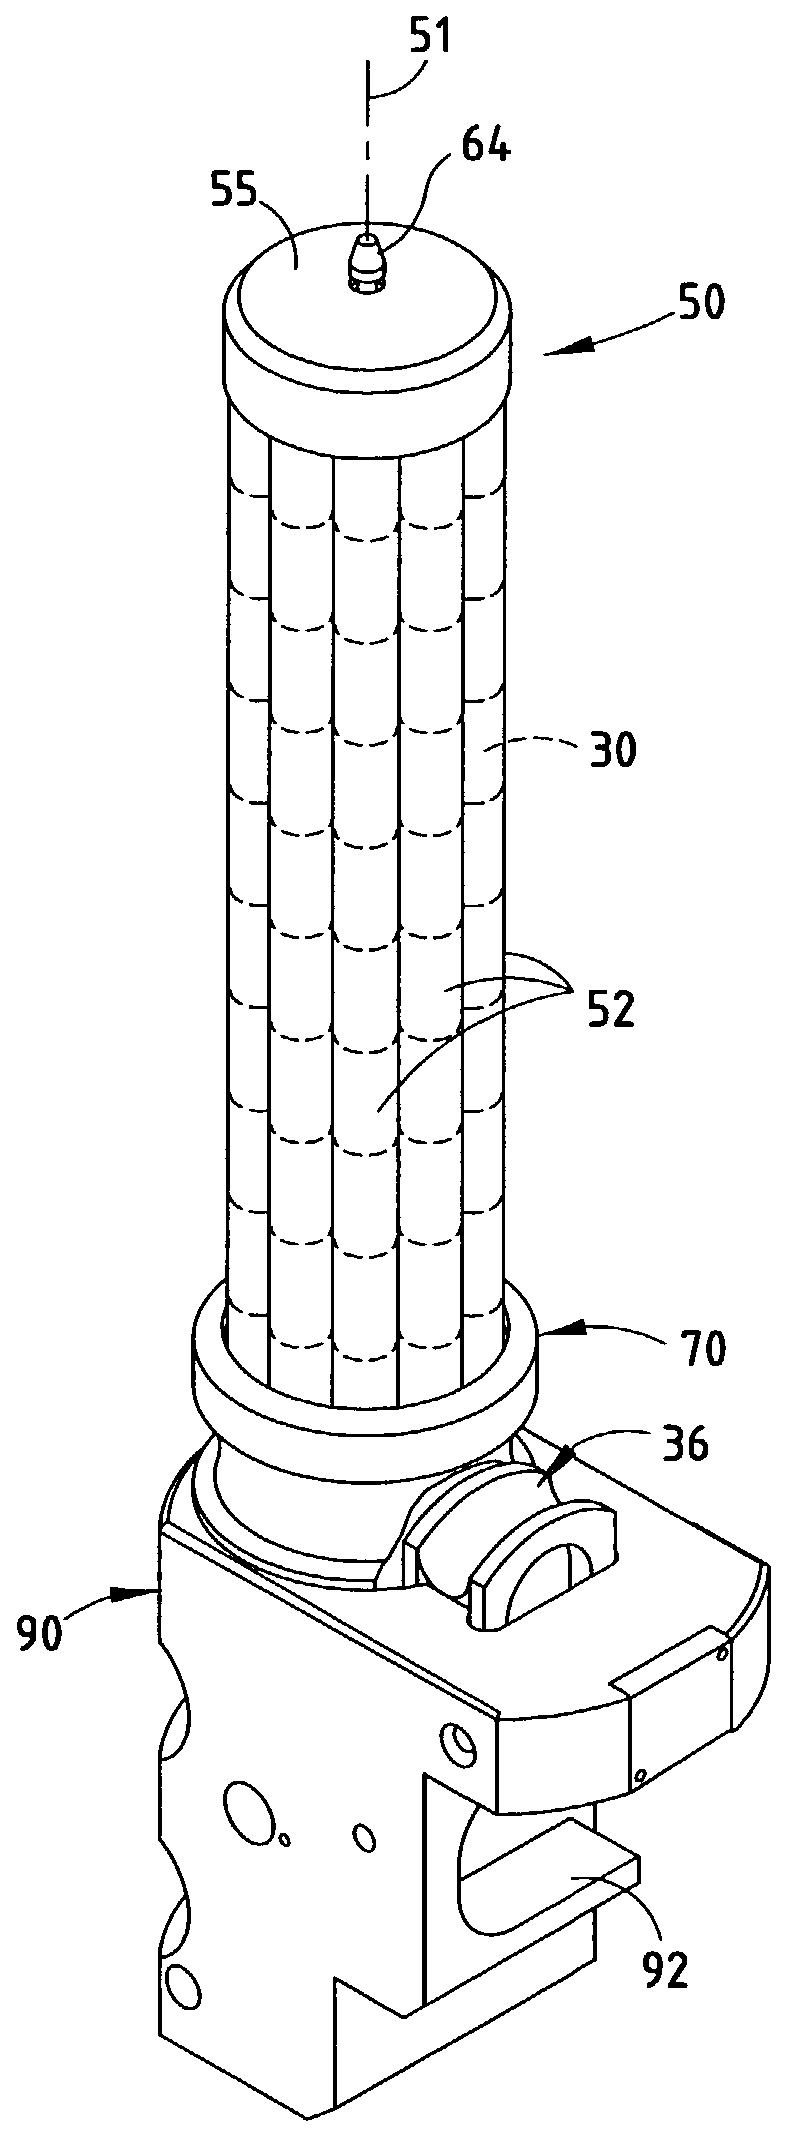 Automatic crucible and sample loading system and method